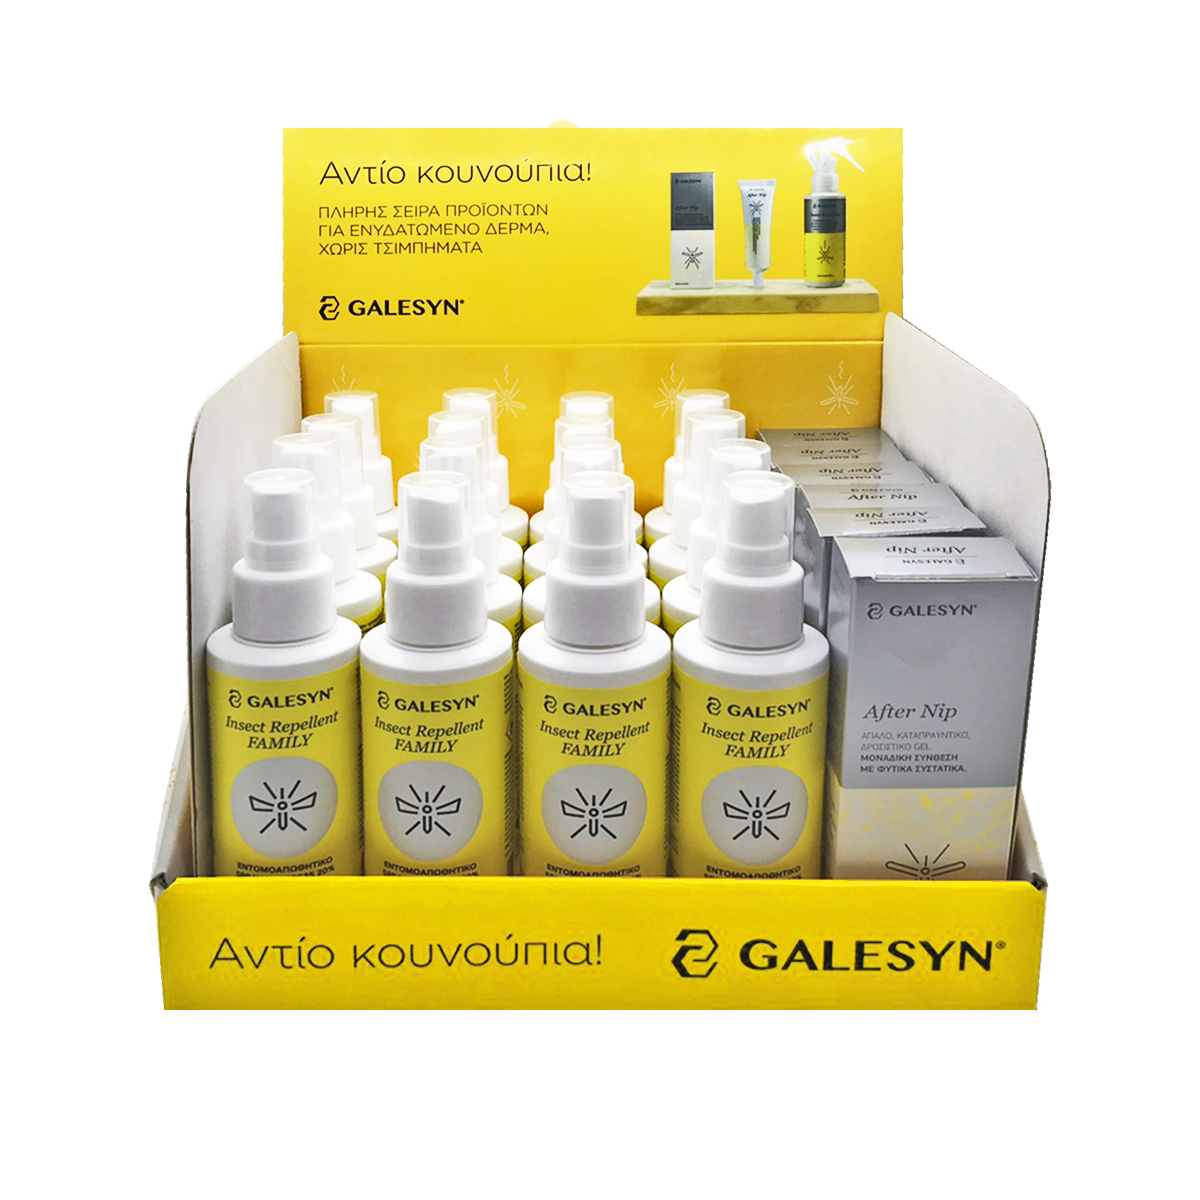 Galesyn Stand Αντικουνουπικών (περ. 16τμχ Insect Repellent Family IR3535 &amp; 6τμχ After Nip)